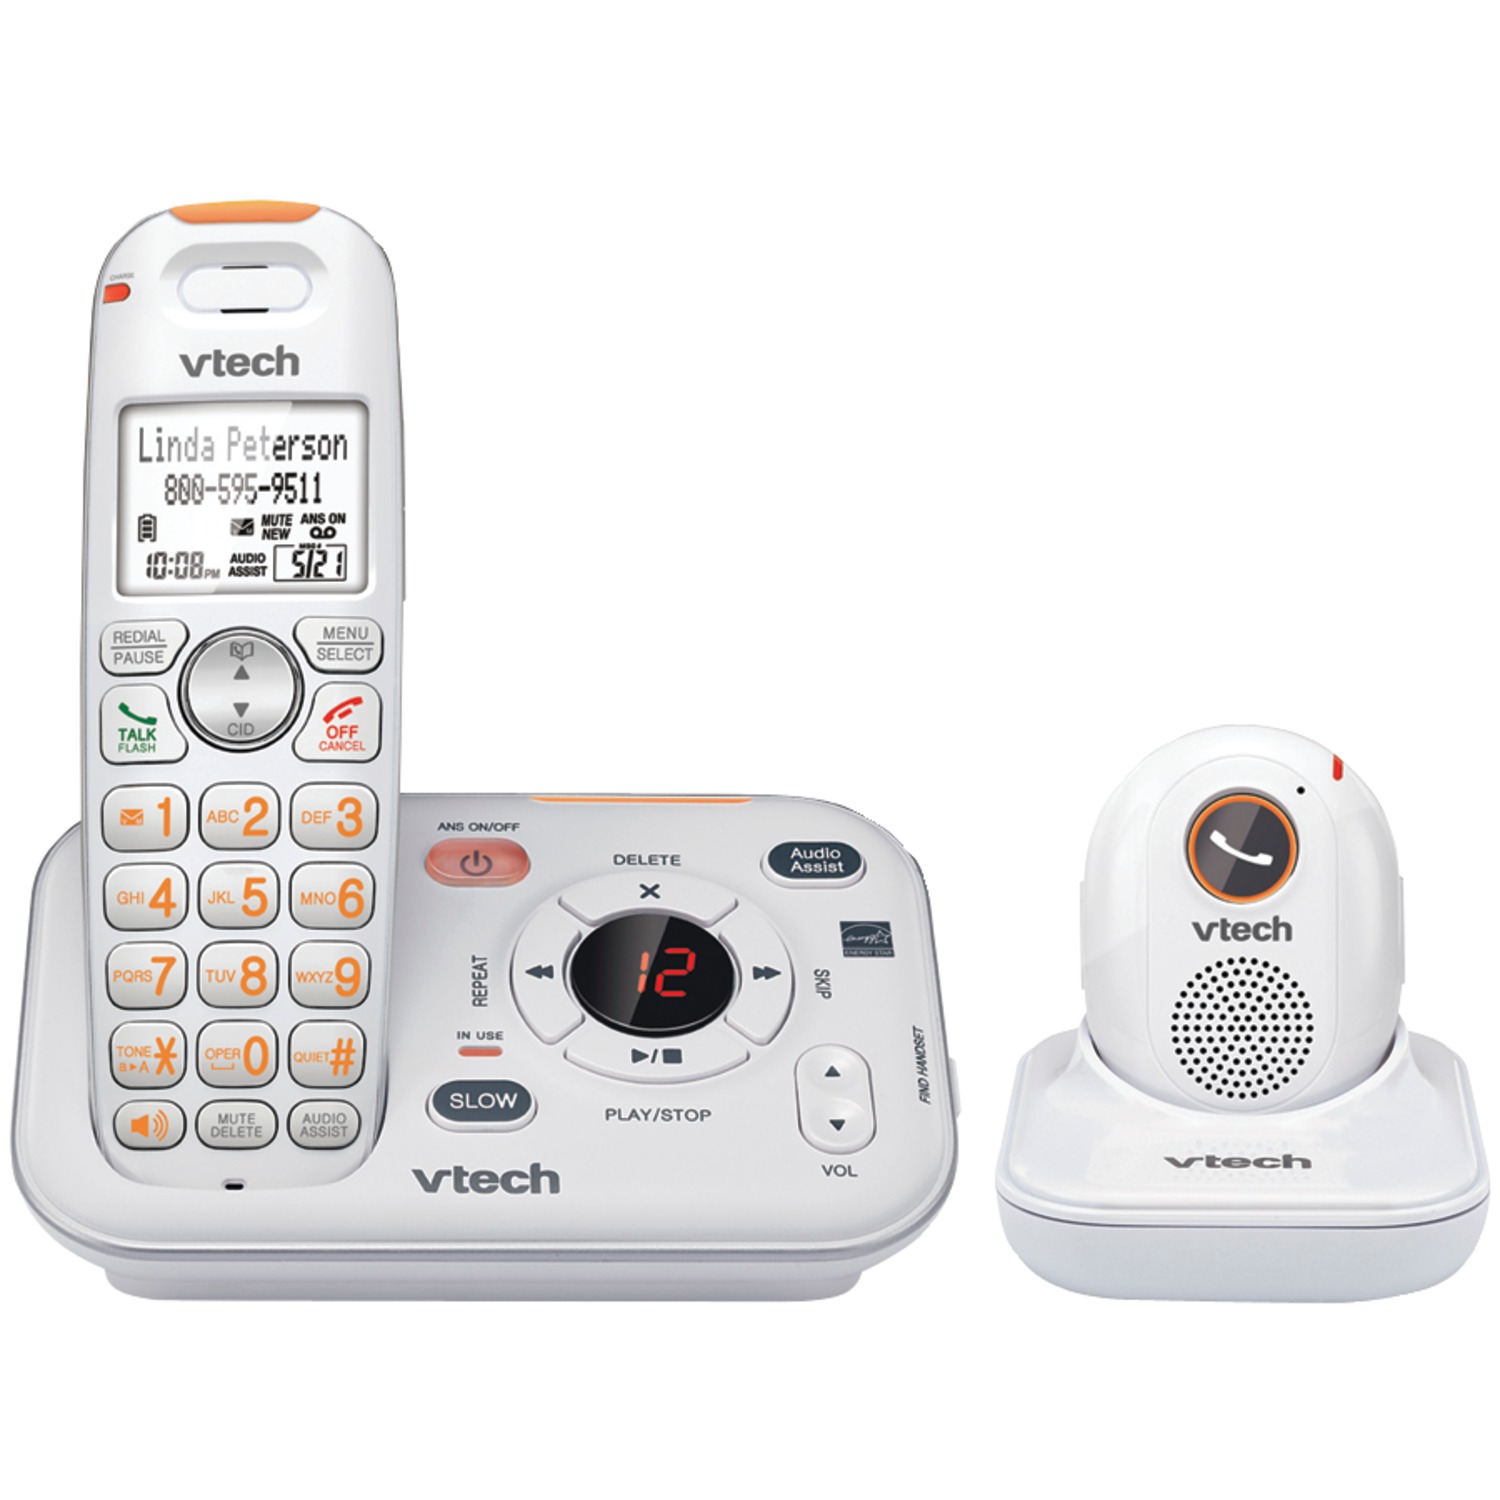 Vtech Sn6187 Careline Cordless Answering System With Portable Pendant - image 1 of 5